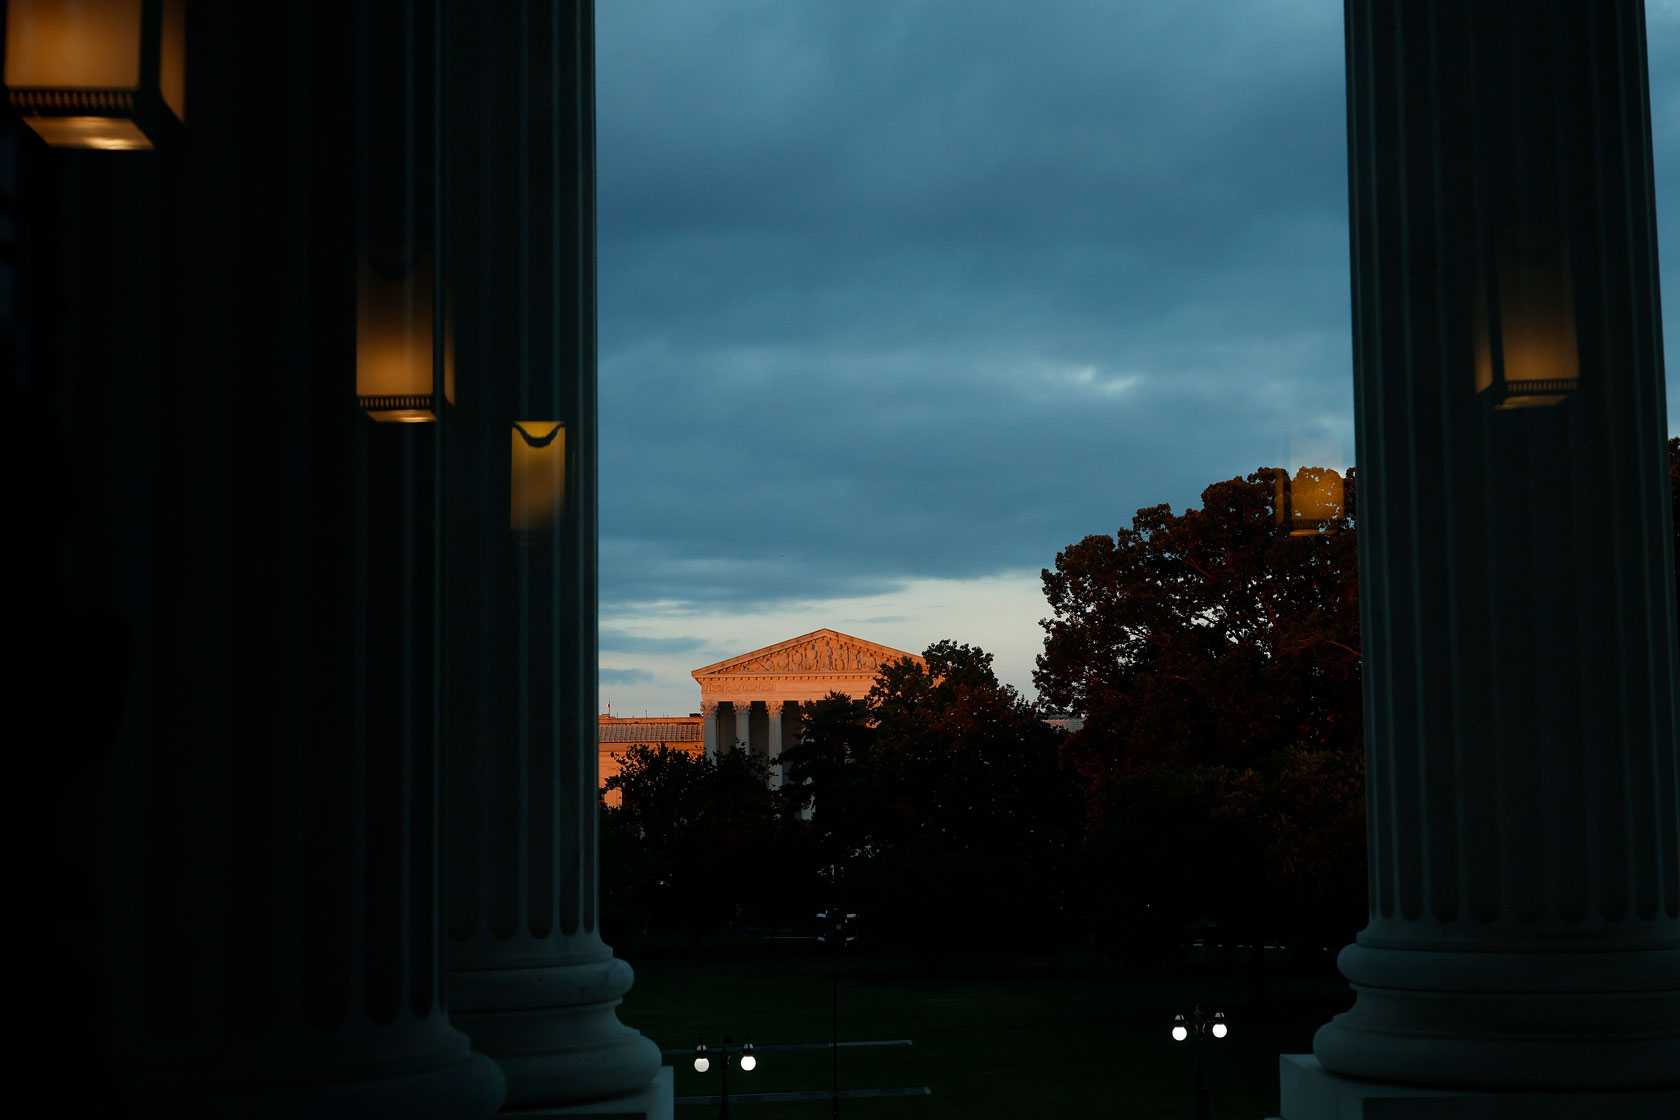 Photo shows a partial view of the Supreme Court building illuminated by late-afternoon light, with trees partly obstructing the view.